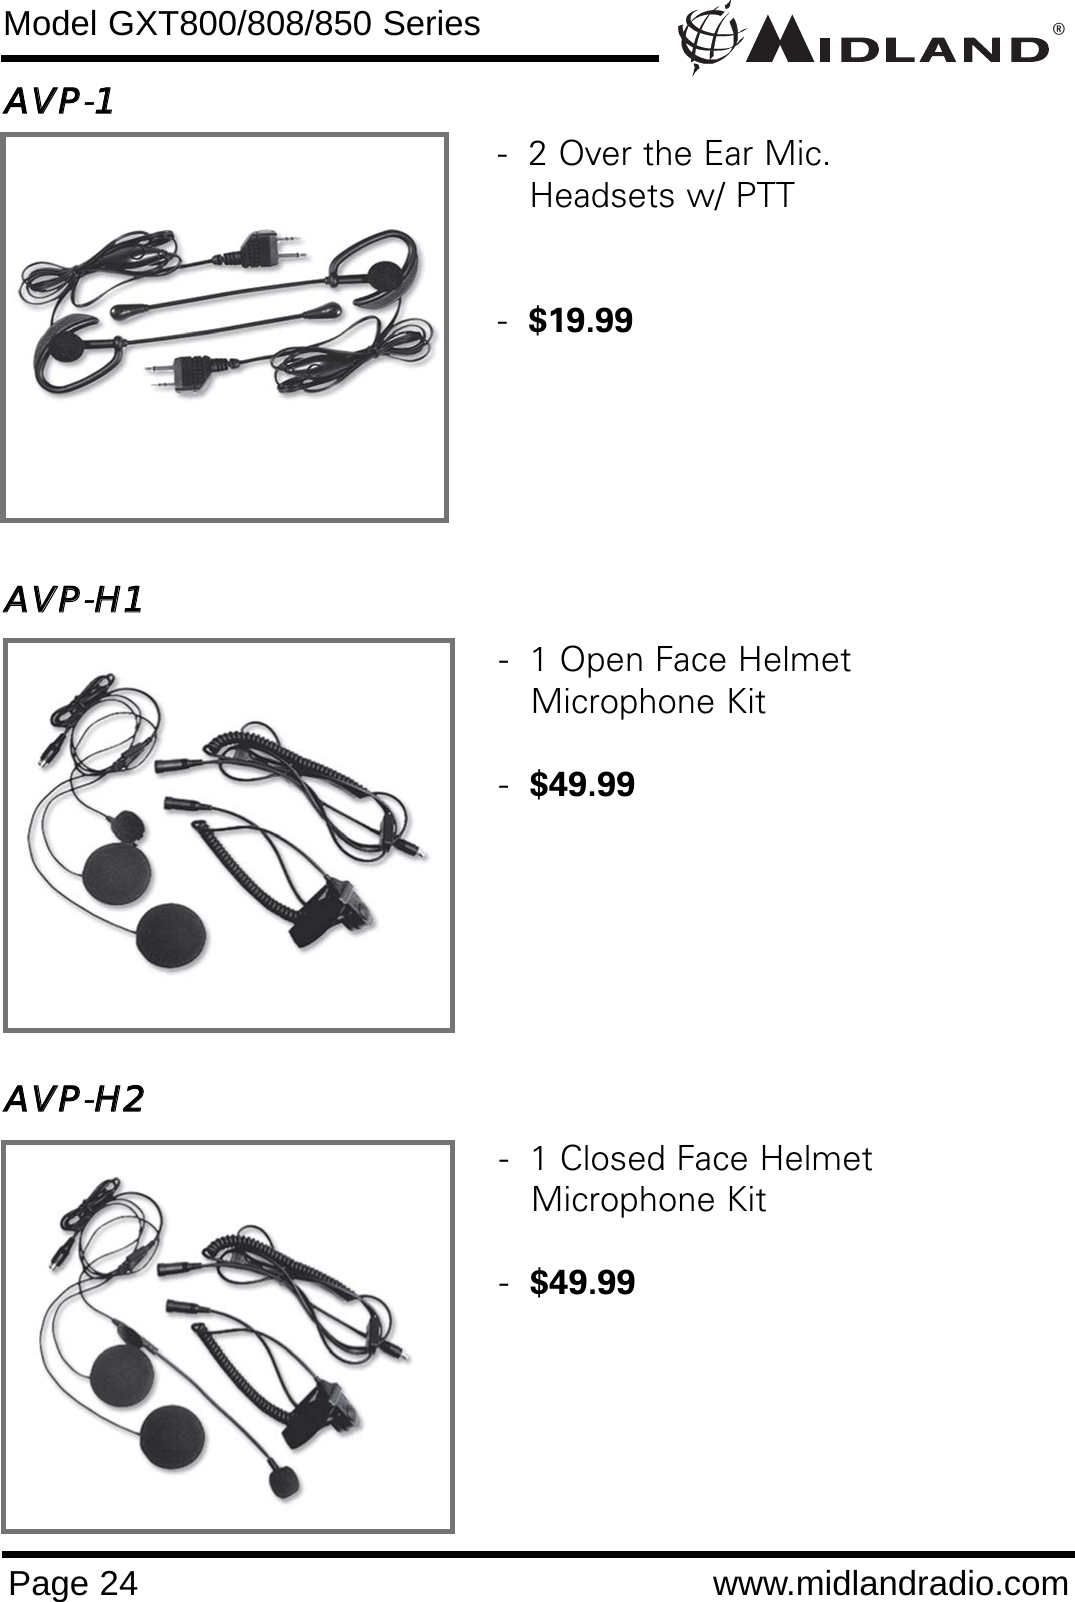 AAVVPP-11AAVVPP-HH11AAVVPP-HH22®Page 24 www.midlandradio.comModel GXT800/808/850 Series-  1 Open Face Helmet Microphone Kit-  $49.99-  1 Closed Face HelmetMicrophone Kit-  $49.99-  2 Over the Ear Mic. Headsets w/ PTT-  $19.99